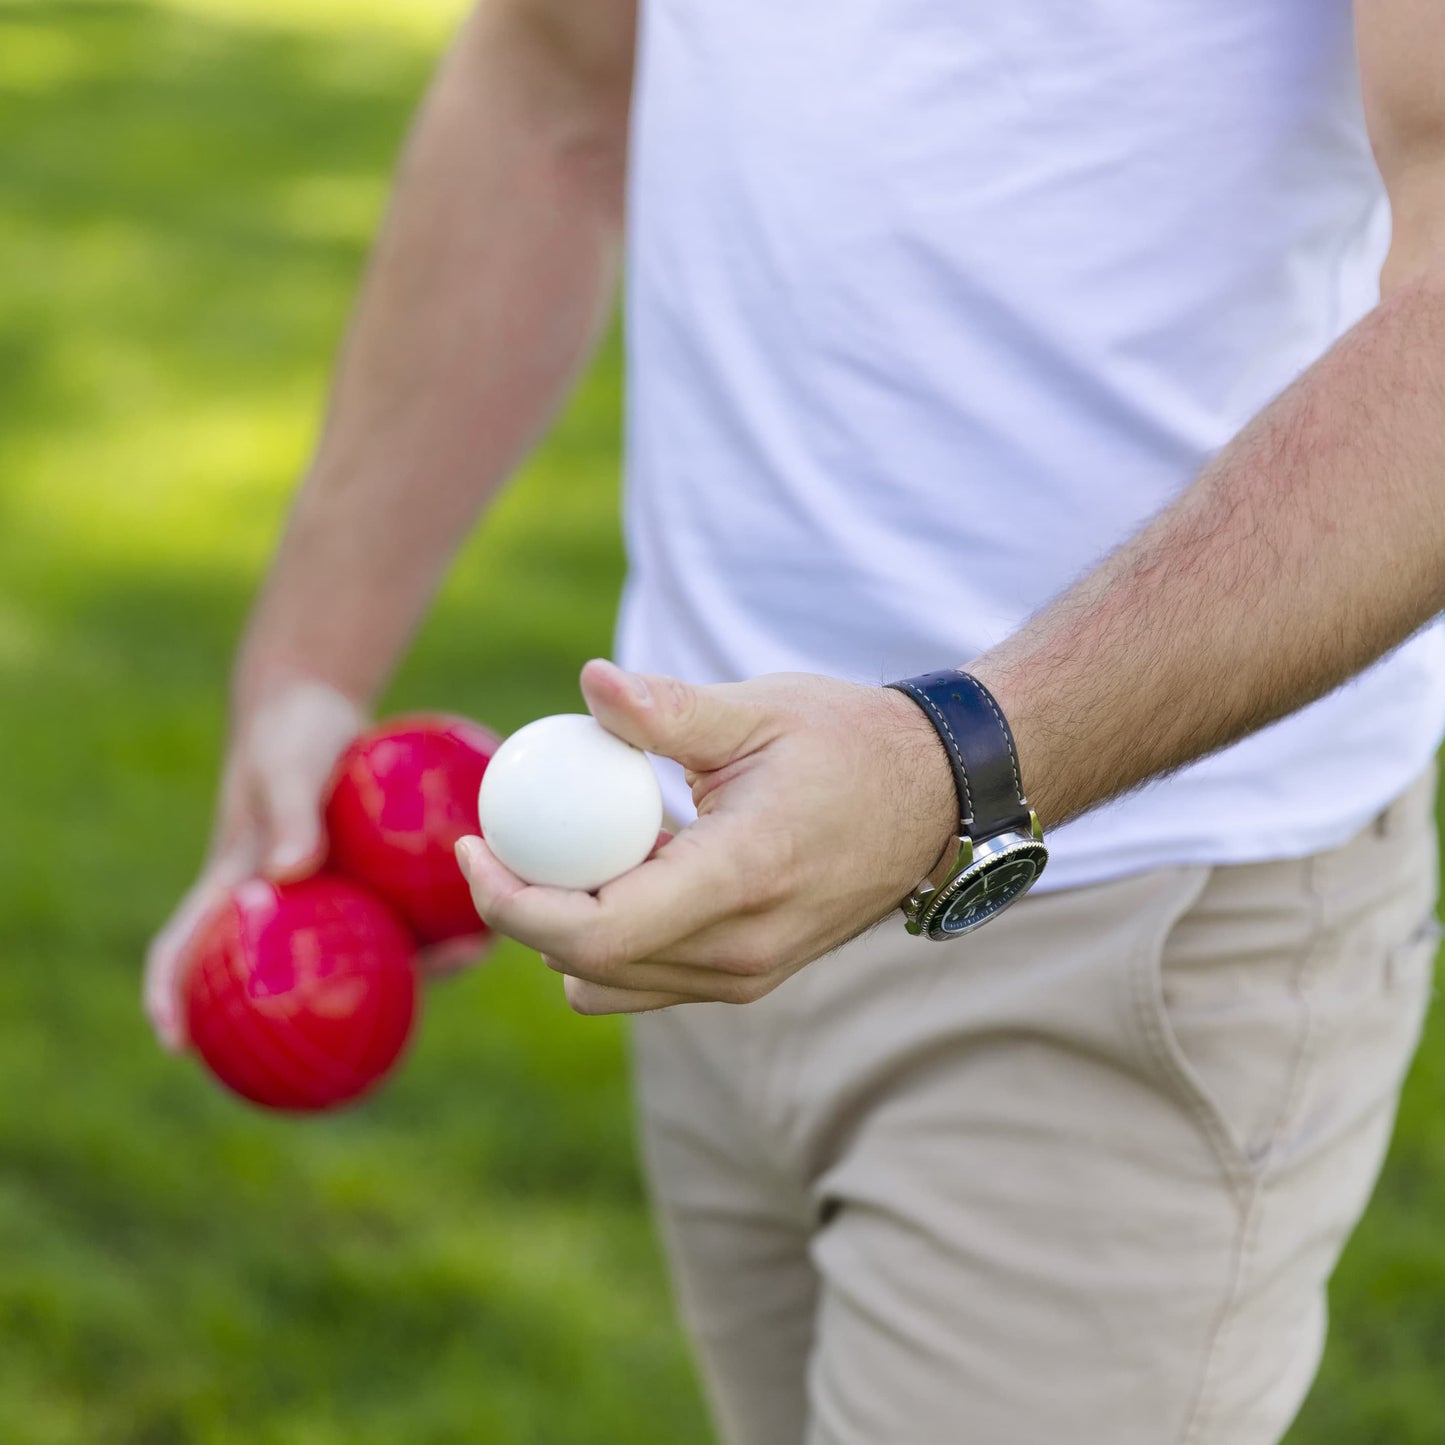 Sportcraft Bocce Ball Set Lifestyle Image, Man holding Bocce balls in hand